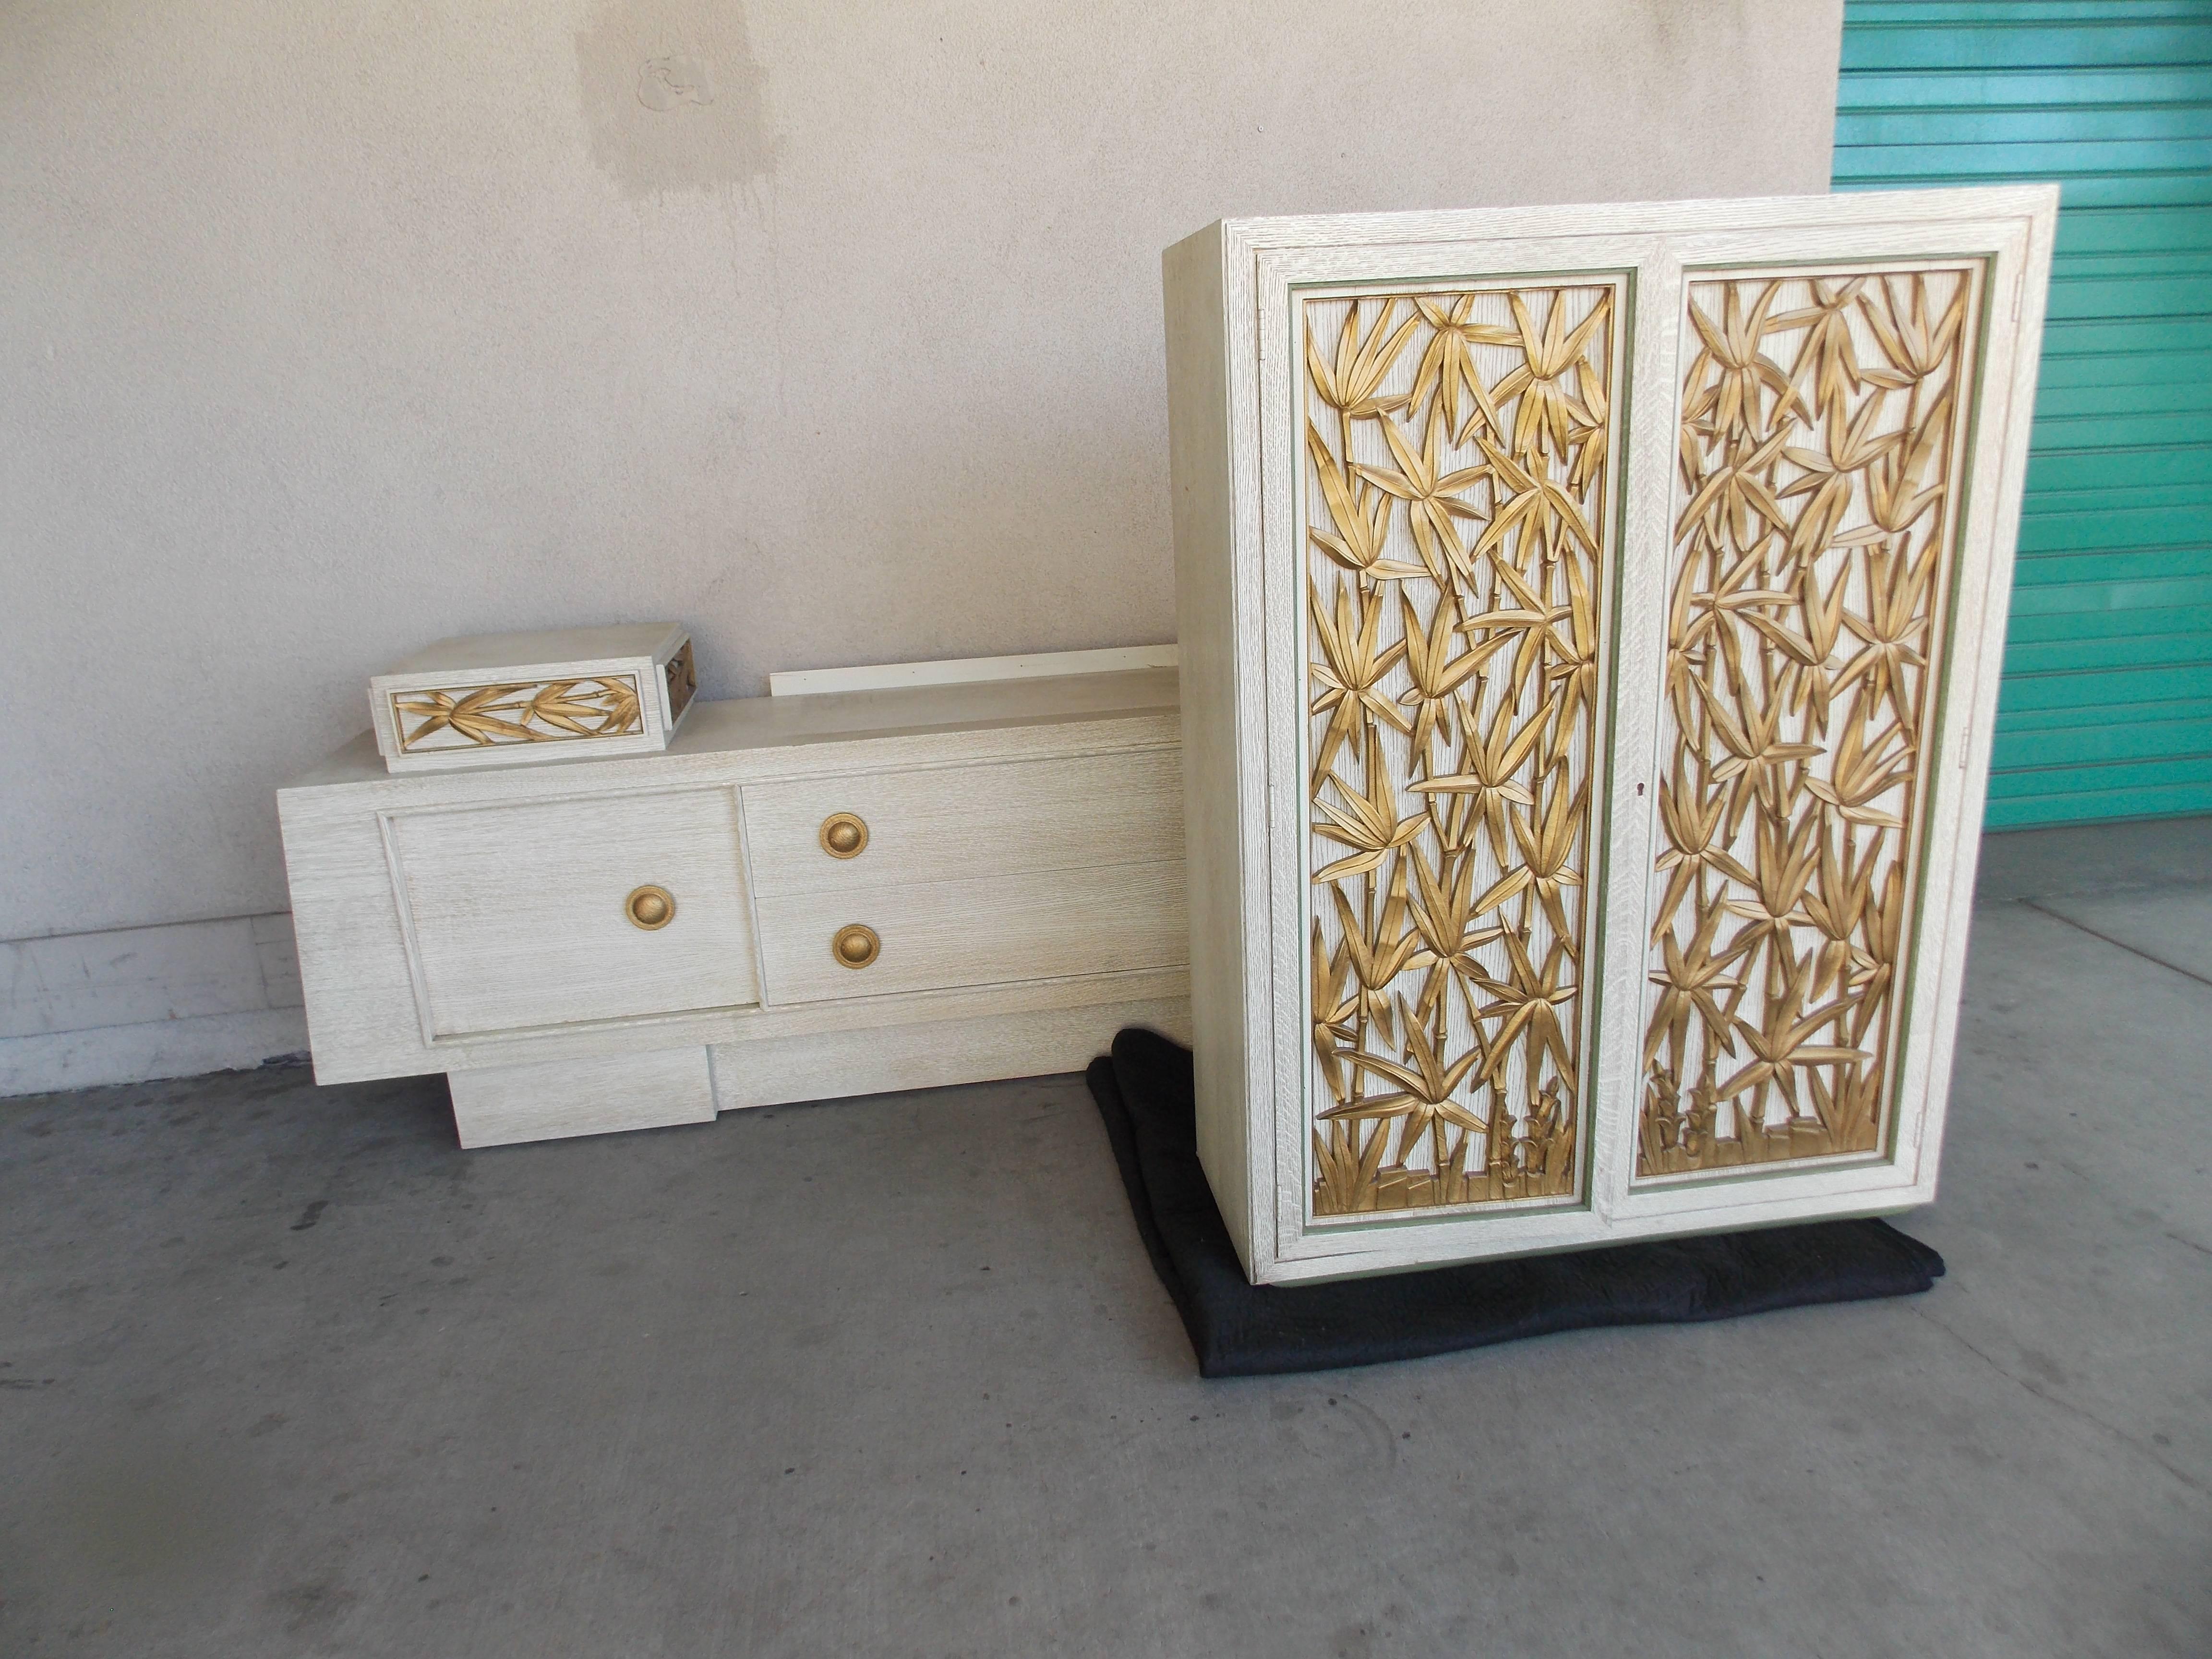 Modern Americana.
A great functional decorative design. 
Made of plywood with original limed oak veneer and carved bamboo motif.
It's in the original used / vintage condition.
Minor ware consistent with age.
No damage.
It's roughly 79